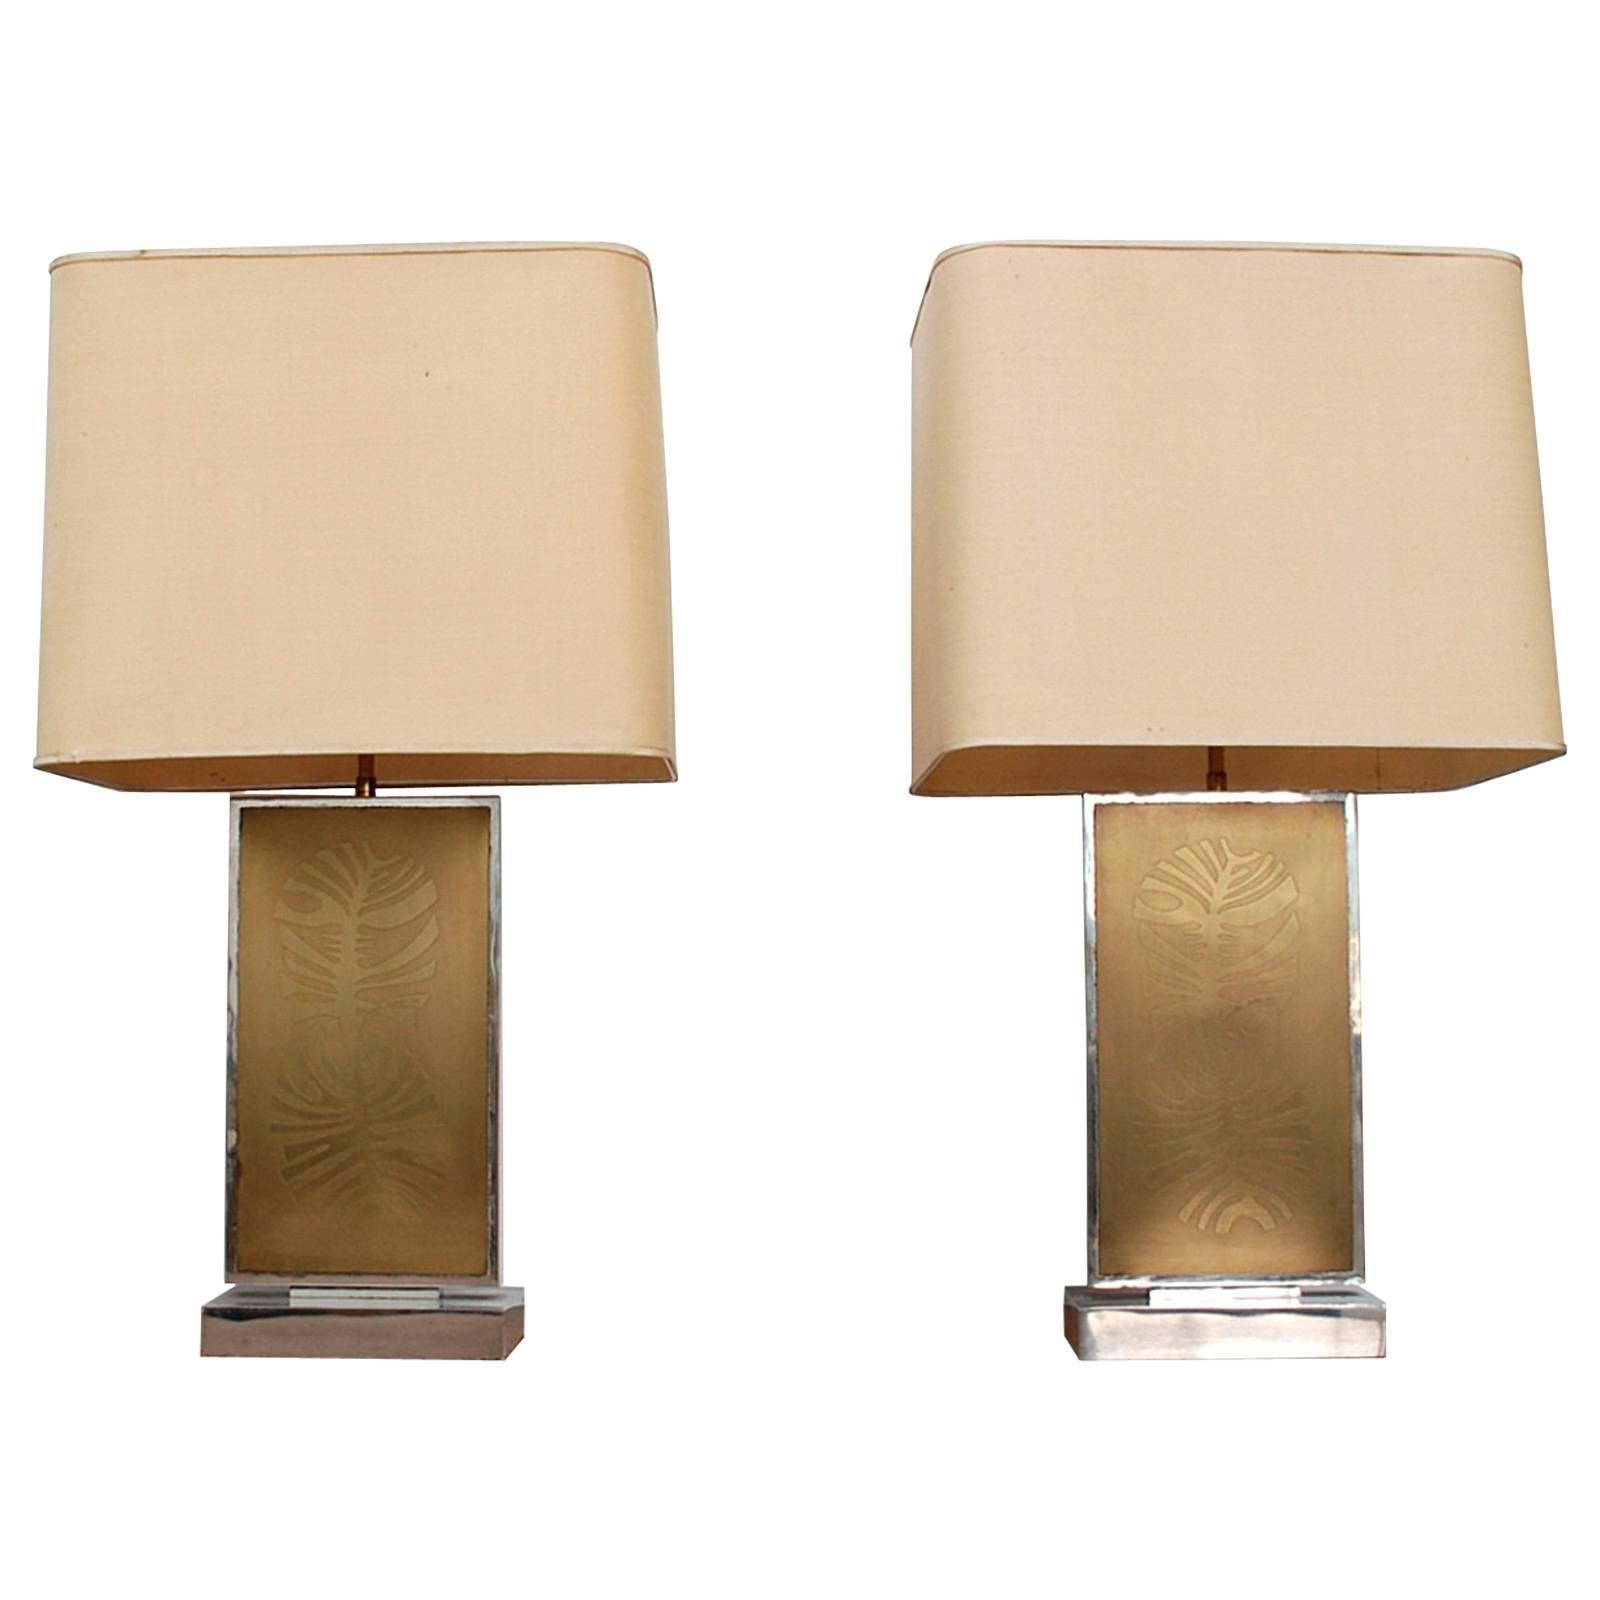 Impressive Pair of Very Rare 1976 Table Lamps Signed by Christian Krekels